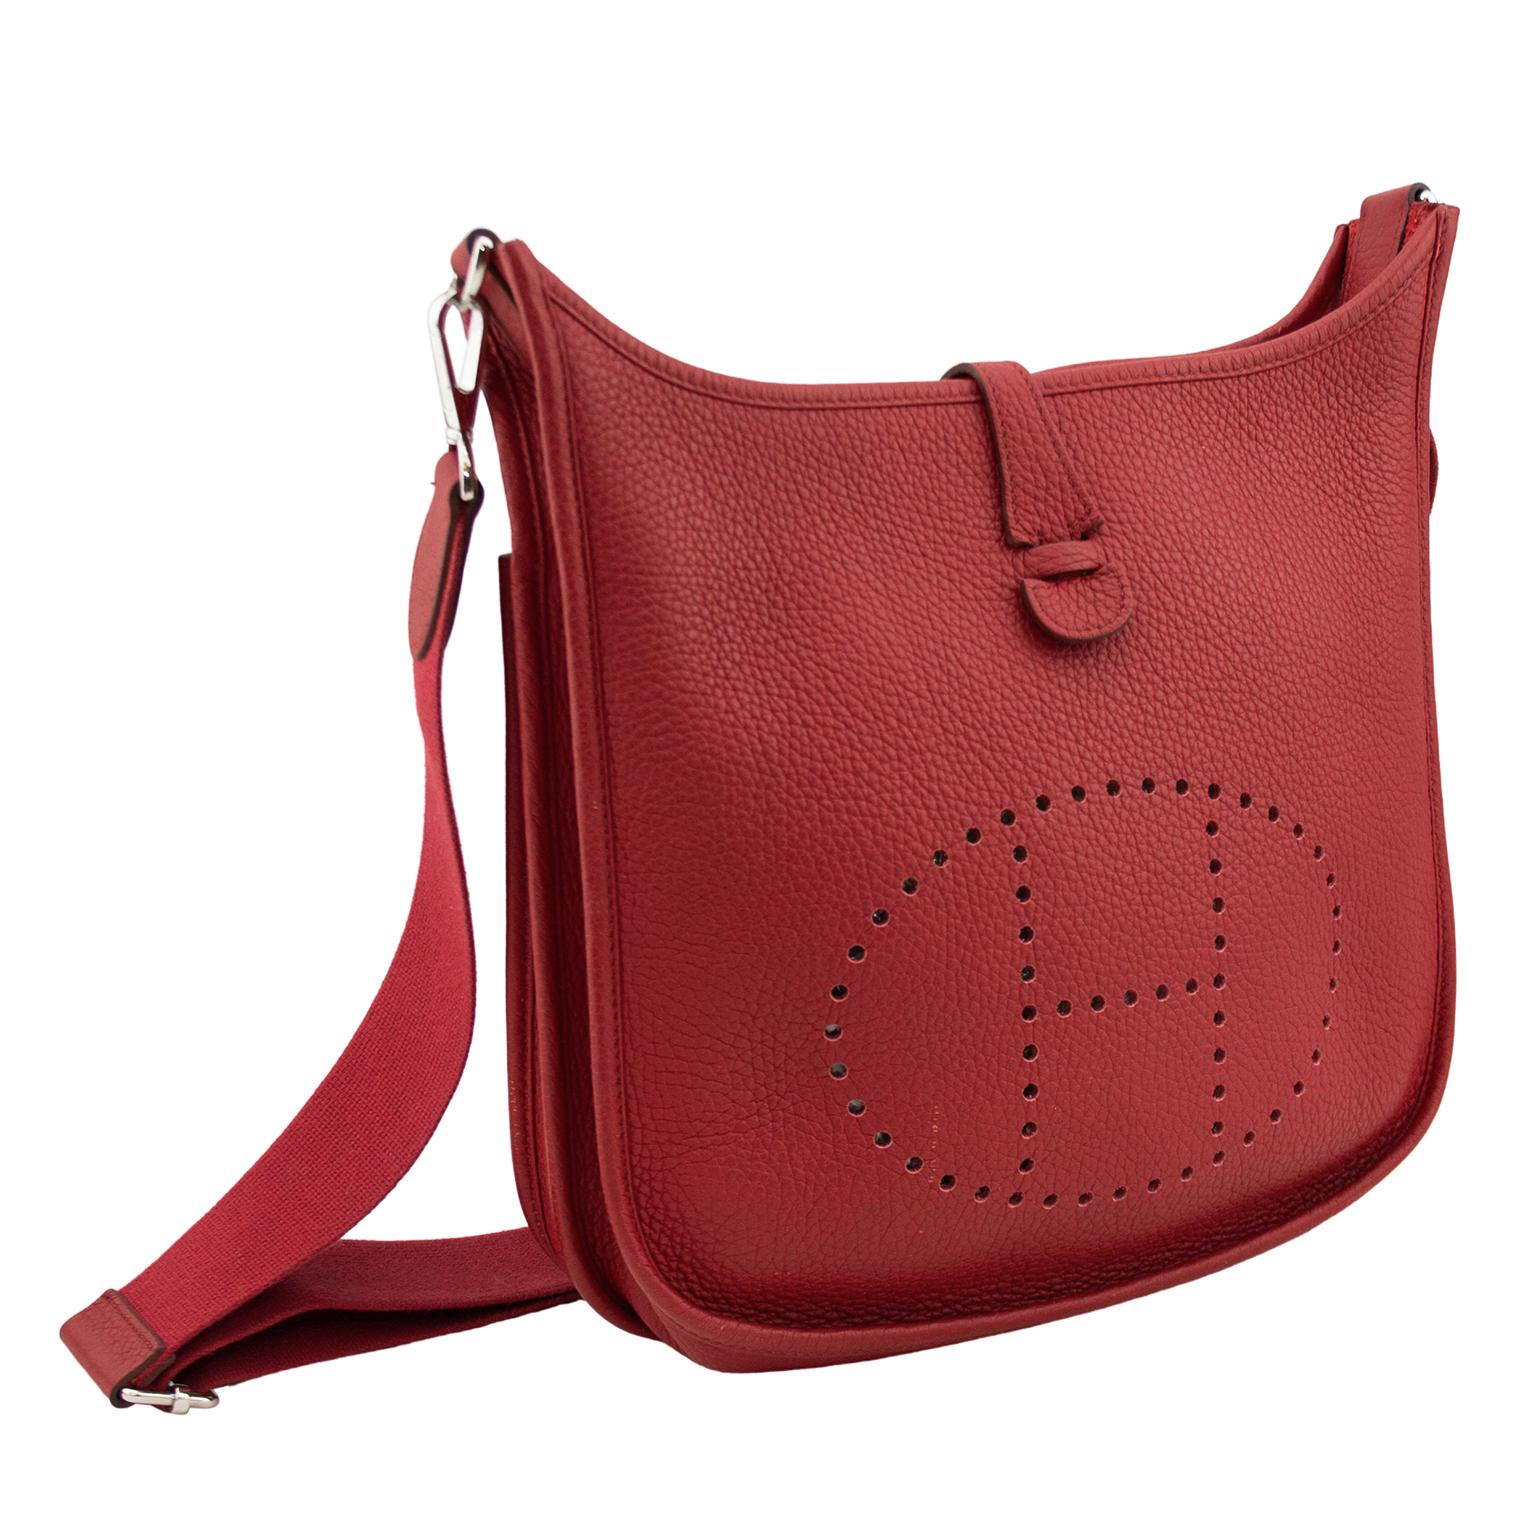 2012 Rouge Garance Clemence grained leather Hermès Evelyne III PM 29 cross body bag with silver-tone hardware, single detachable and adjustable flat shoulder strap, single slit pocket at exterior wall, tonal suede interior lining and snap closure at